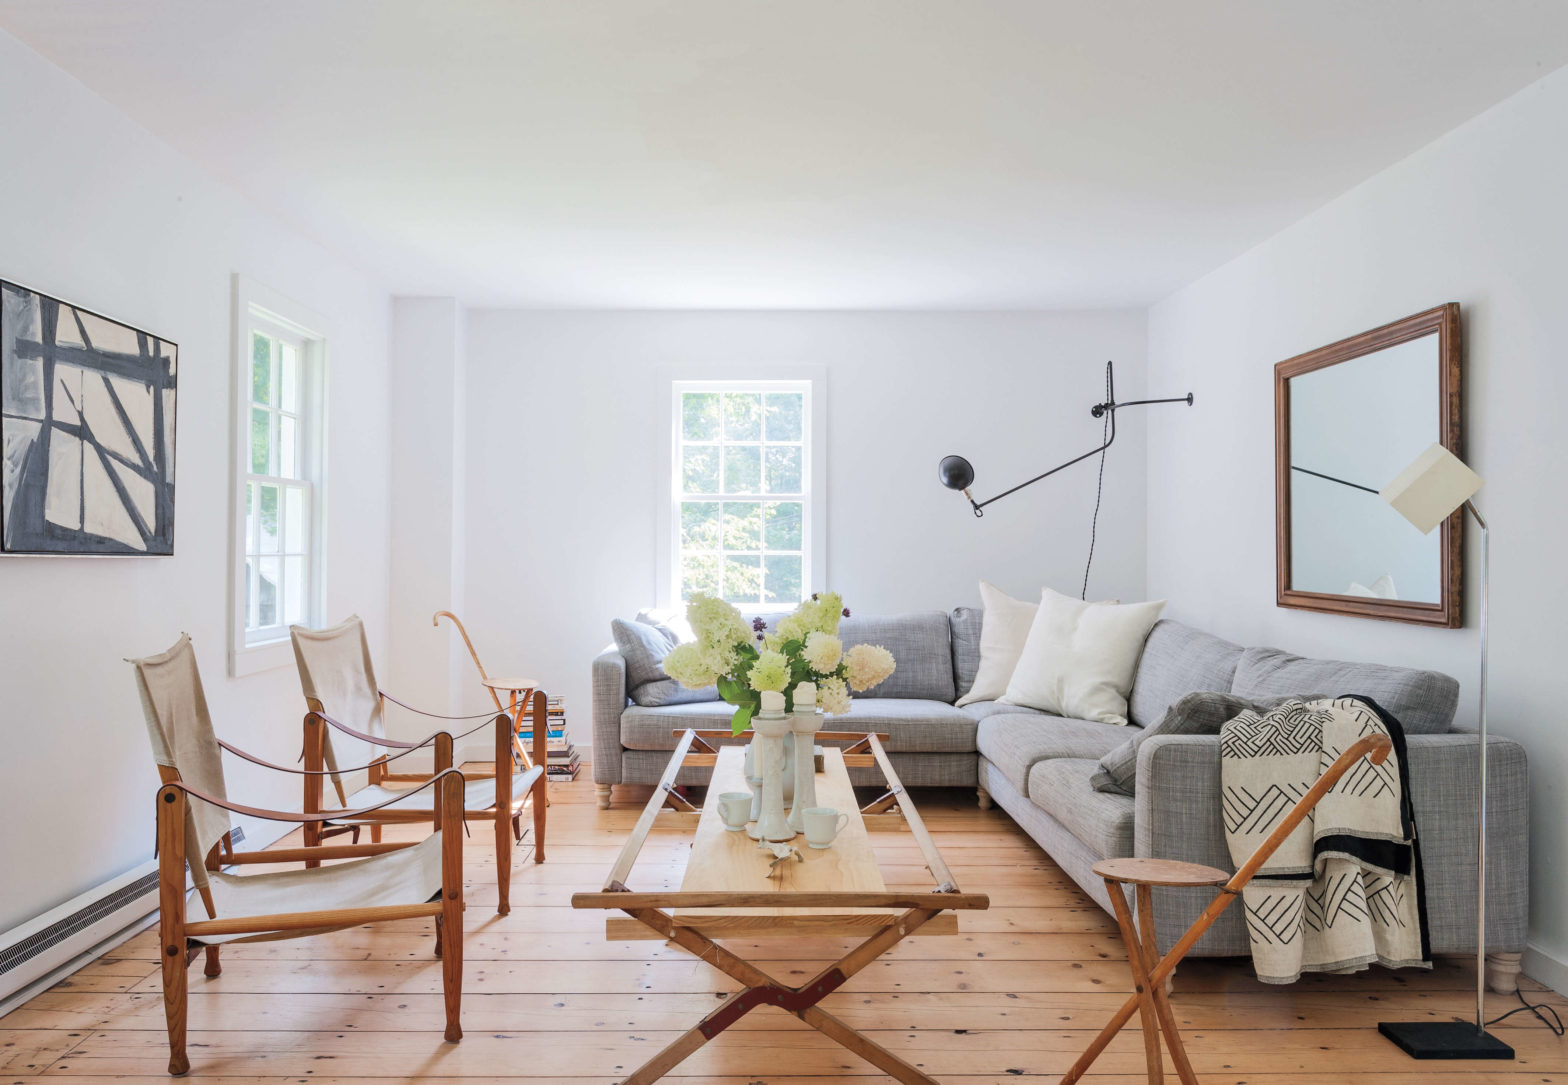 Expert Advice: 11 Tips for Making a Room Look Bigger